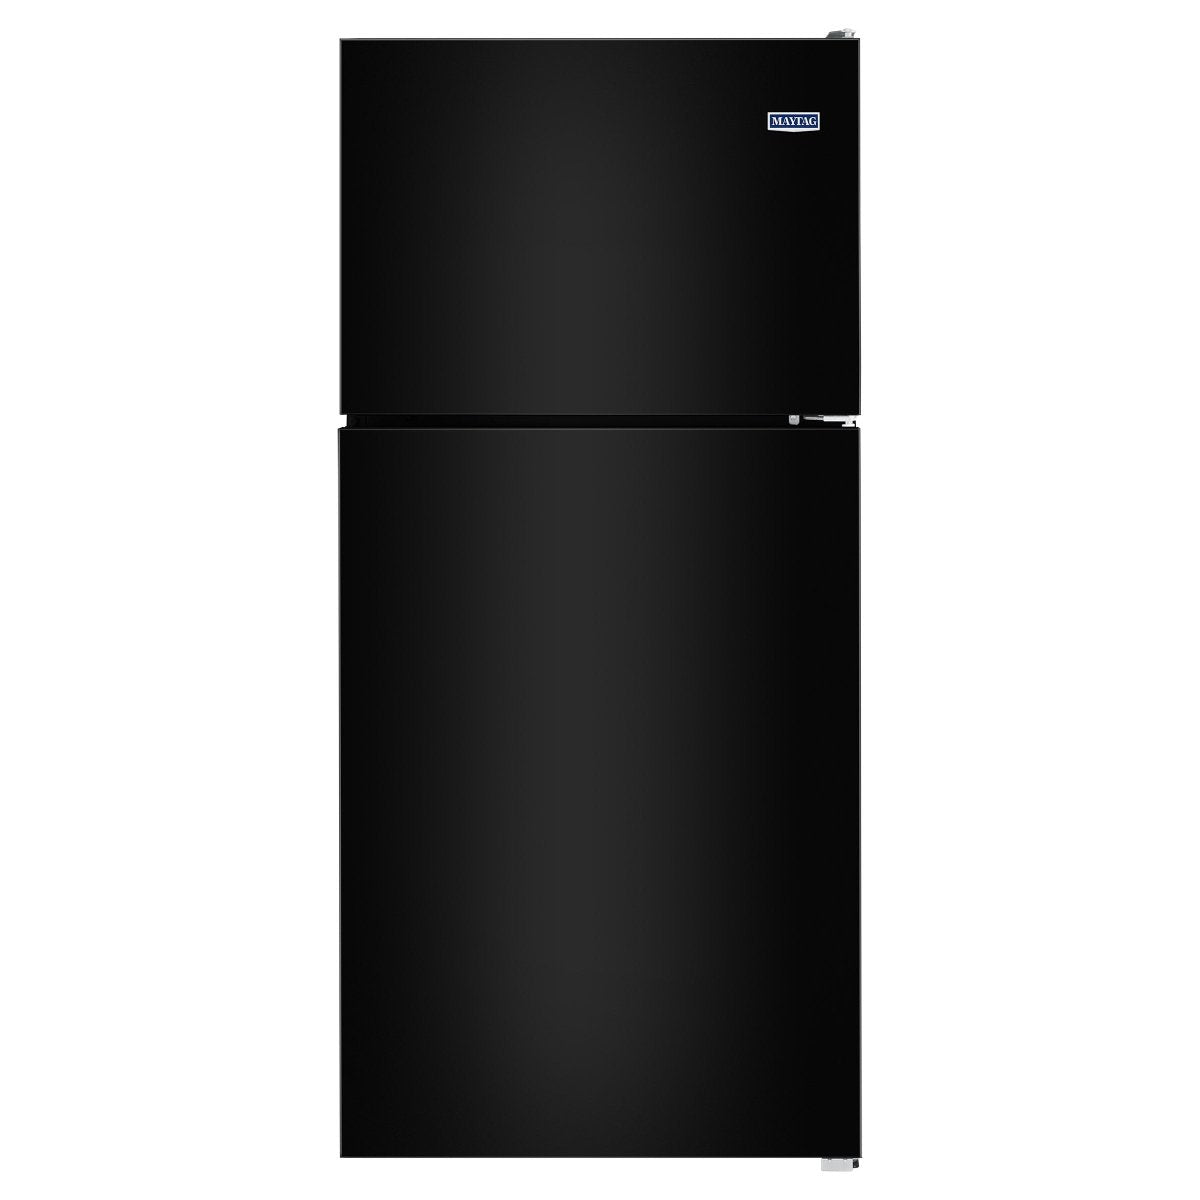 Maytag 21 Cu. Ft. Top Freezer Refrigerator with Powercold Feature - Alpine Outlets